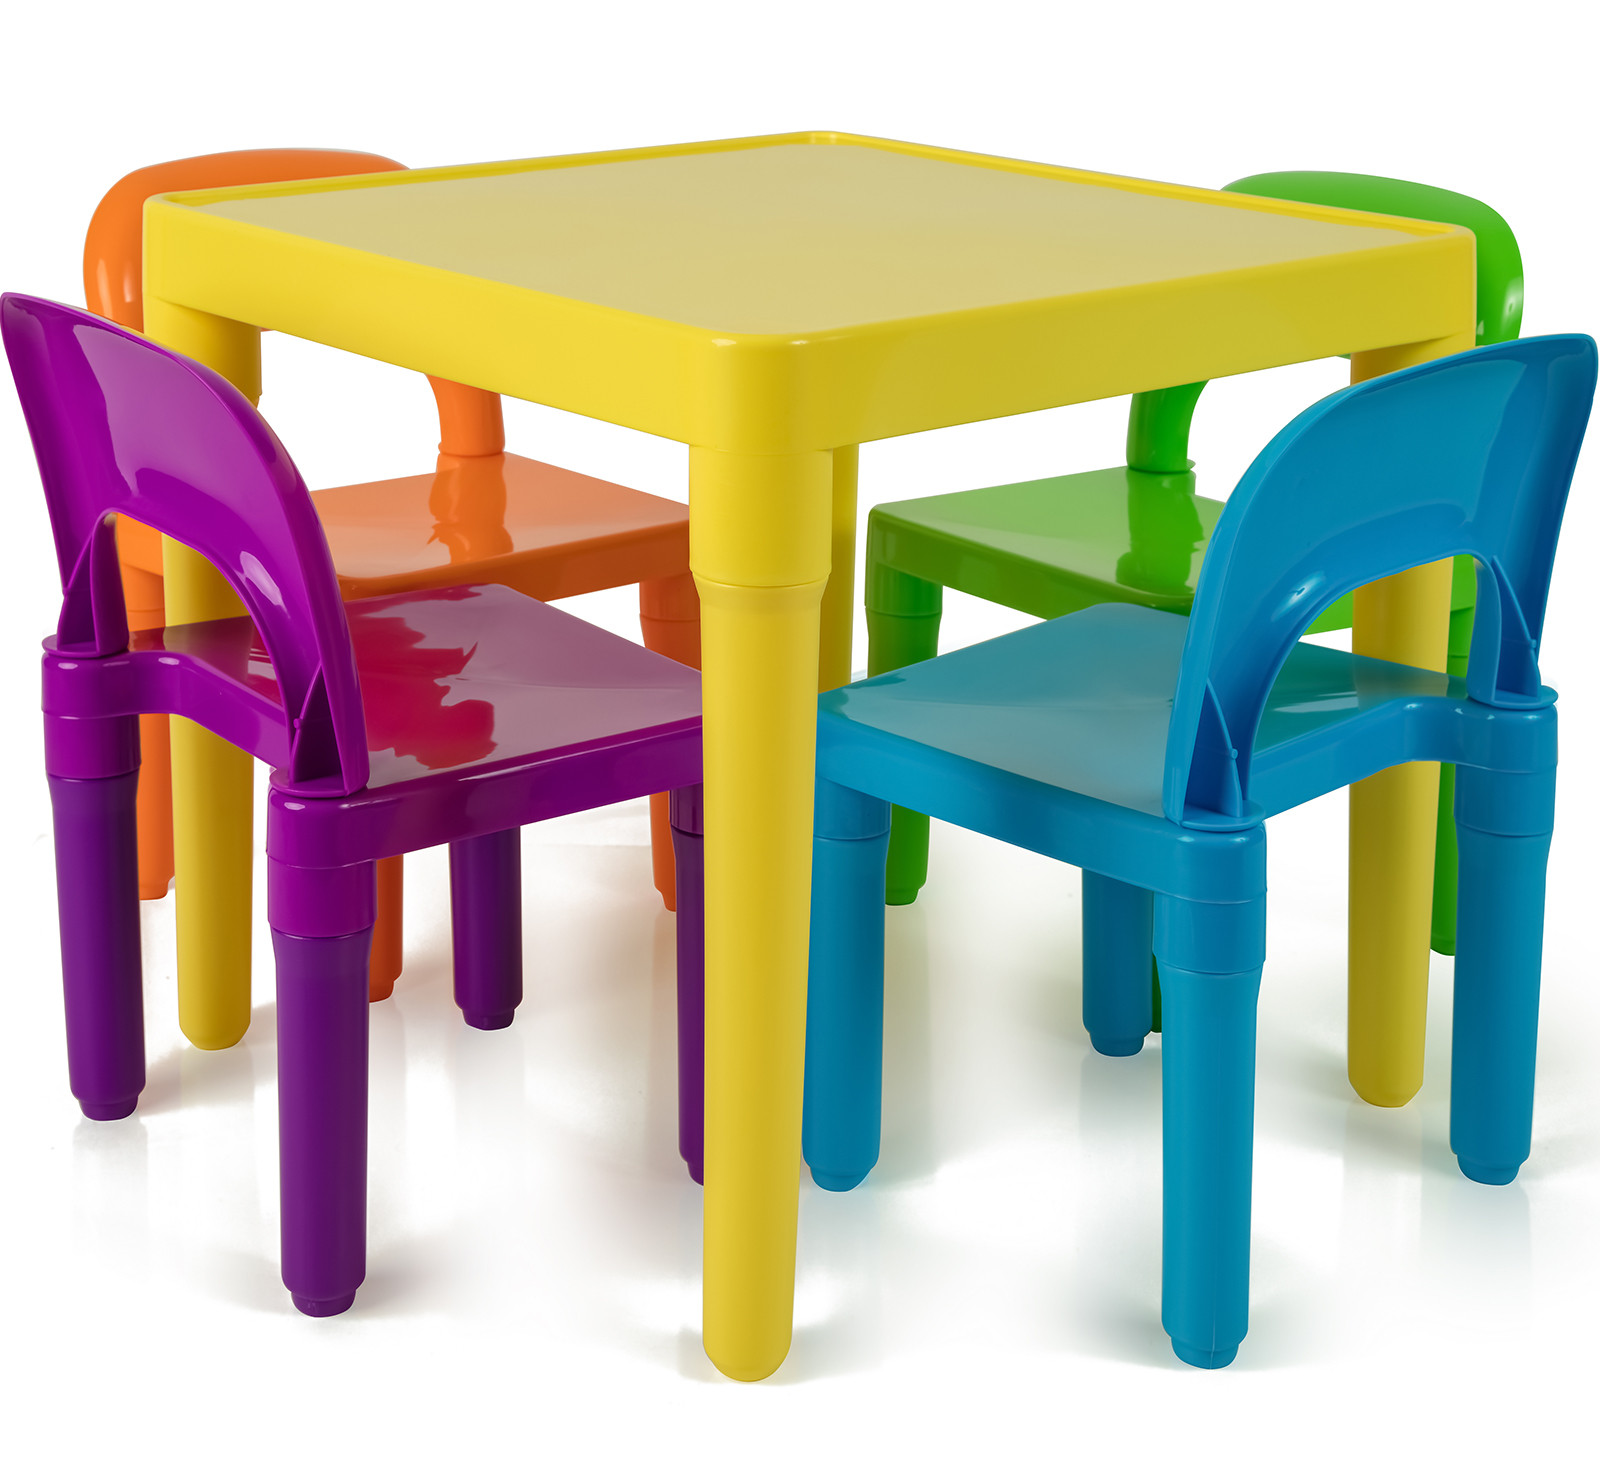 Kids Furniture Chair
 Kids Table and Chairs Play Set Toddler Child Toy Activity